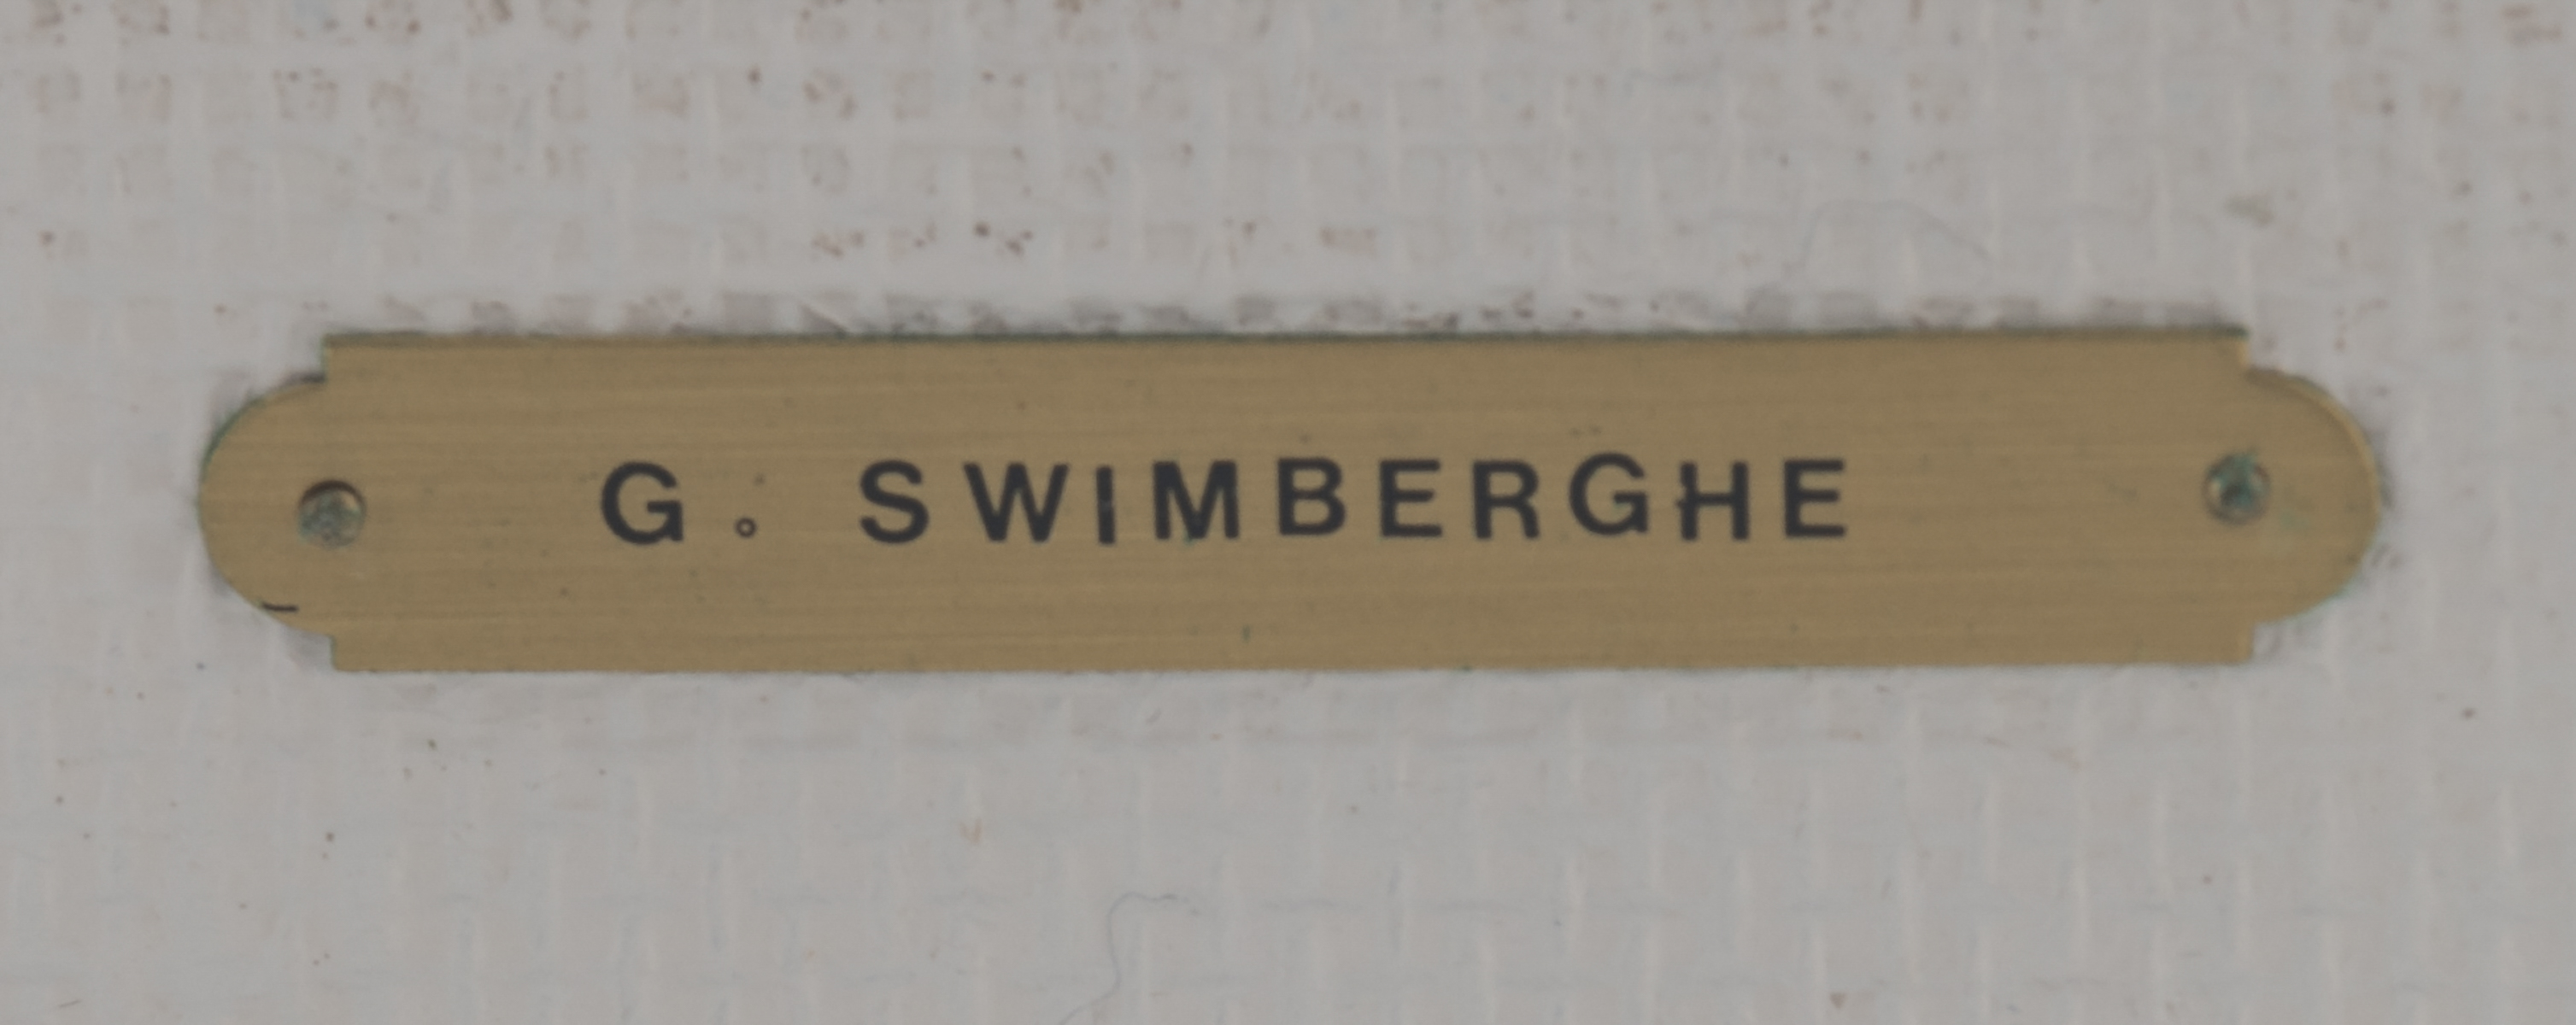 Swimberghe G., untitled, dated 1972, silk screen, 50/50, 44,5 x 49,5 cm; added Hoffmann J., untitled - Image 11 of 11